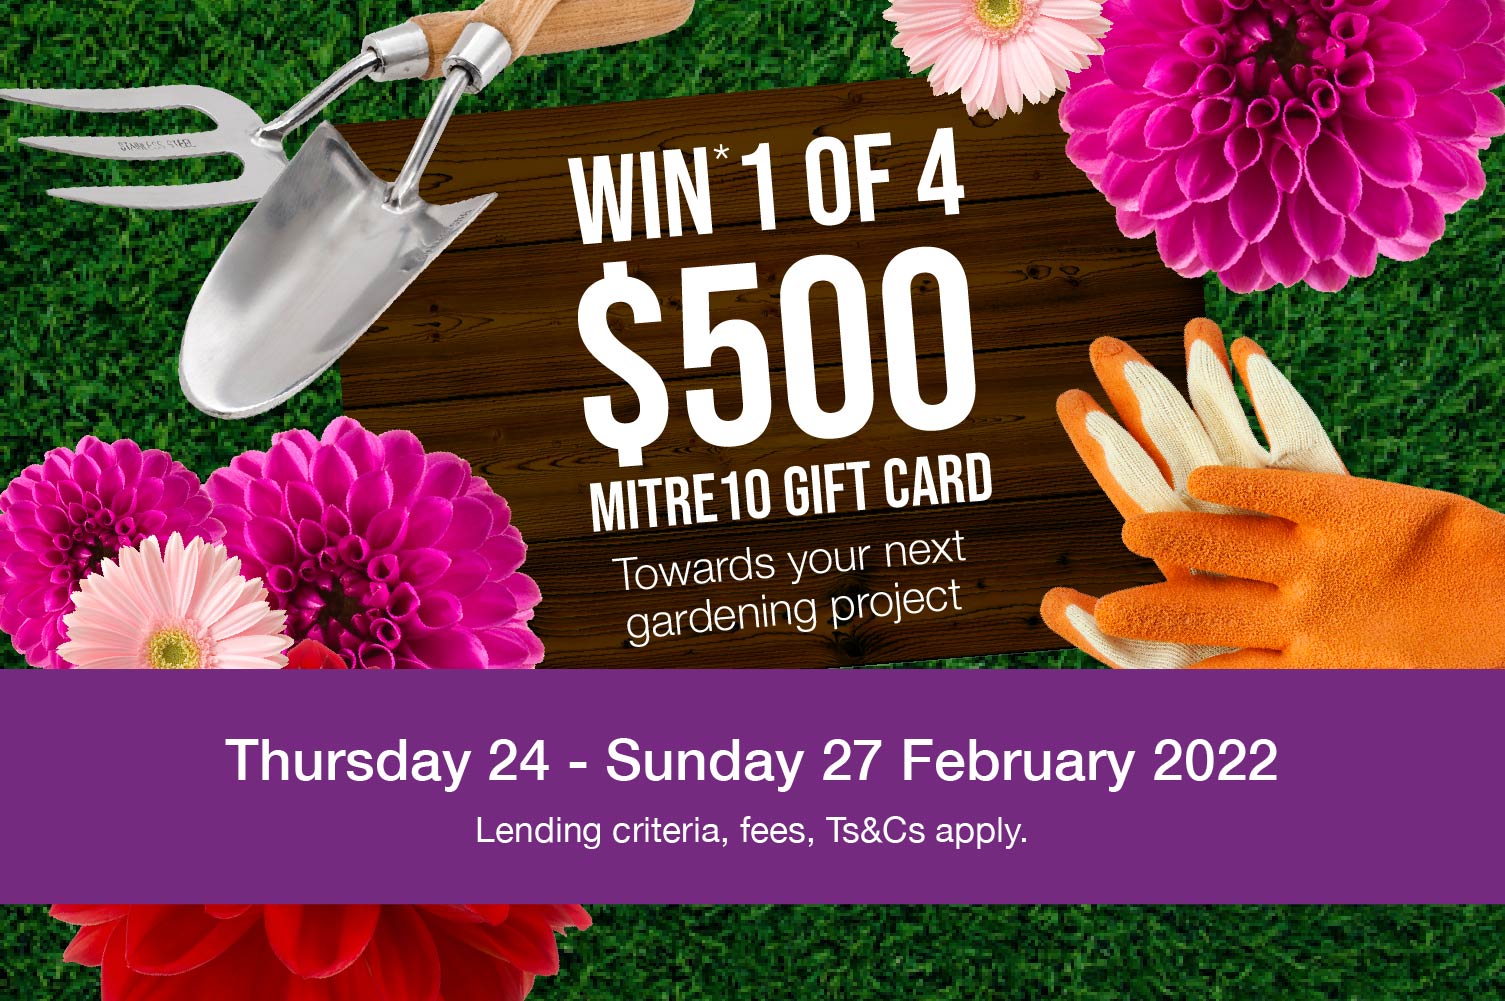 Want a Blooming Marvelous Backyard? WIN* a $500 Mitre10 gift card towards your next gardening project